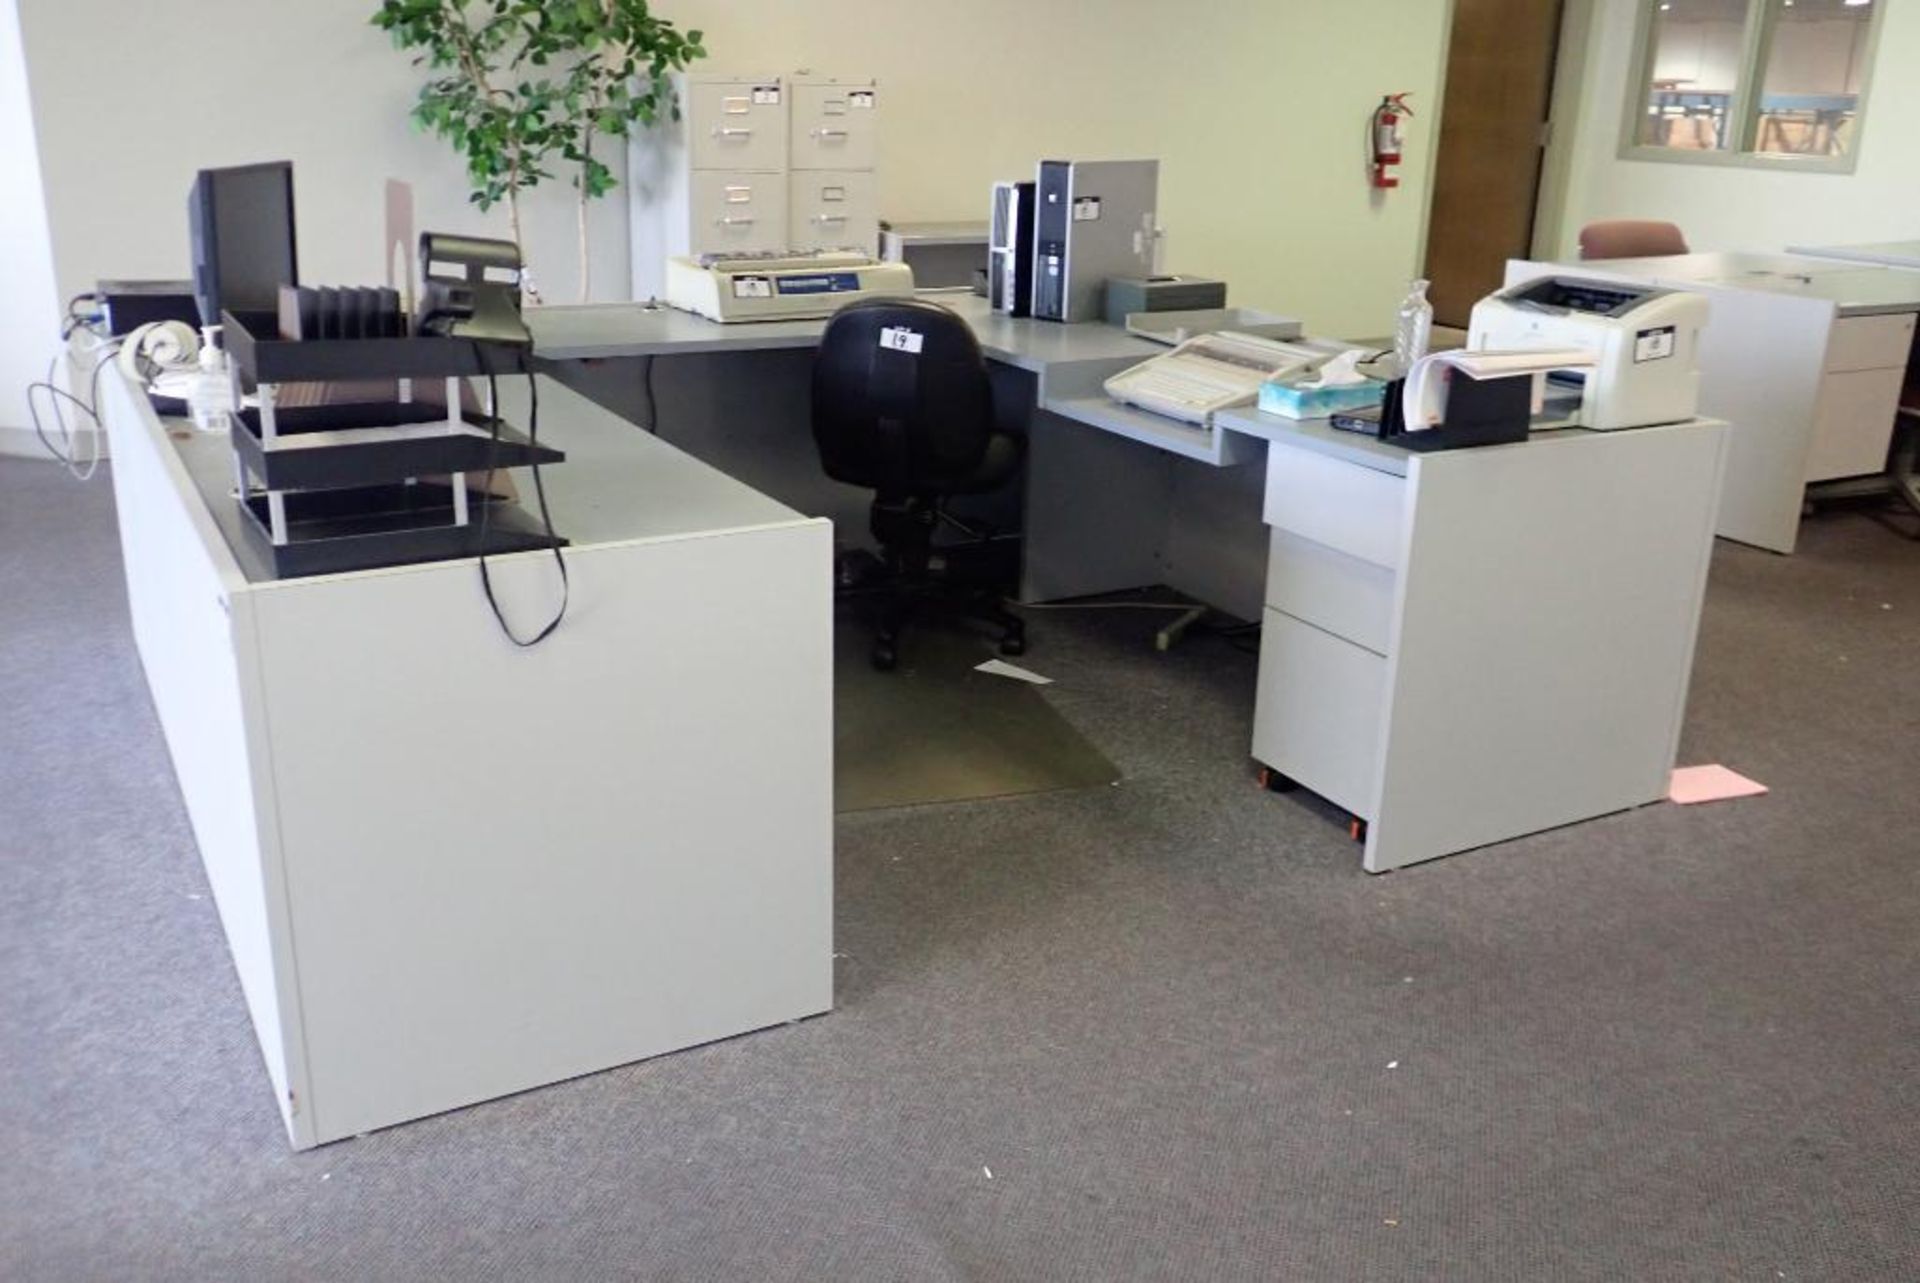 Lot of (3) Desks, (2) Steno Chairs, Vertical File Cabinet, Asst. Office Supplies, etc. - Image 3 of 3